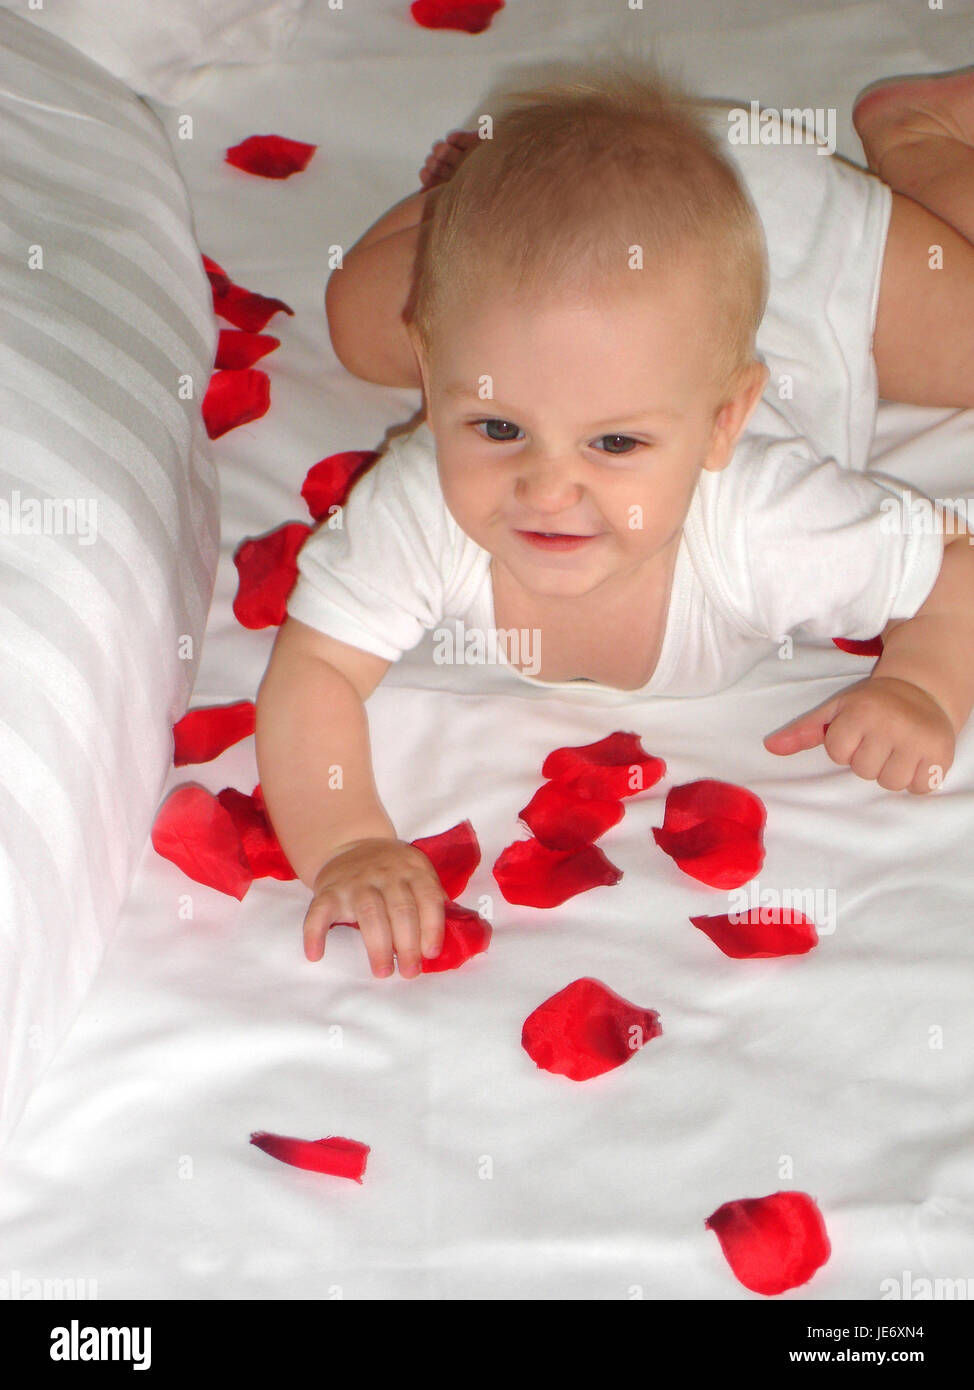 Baby on bed with red petals, Stock Photo